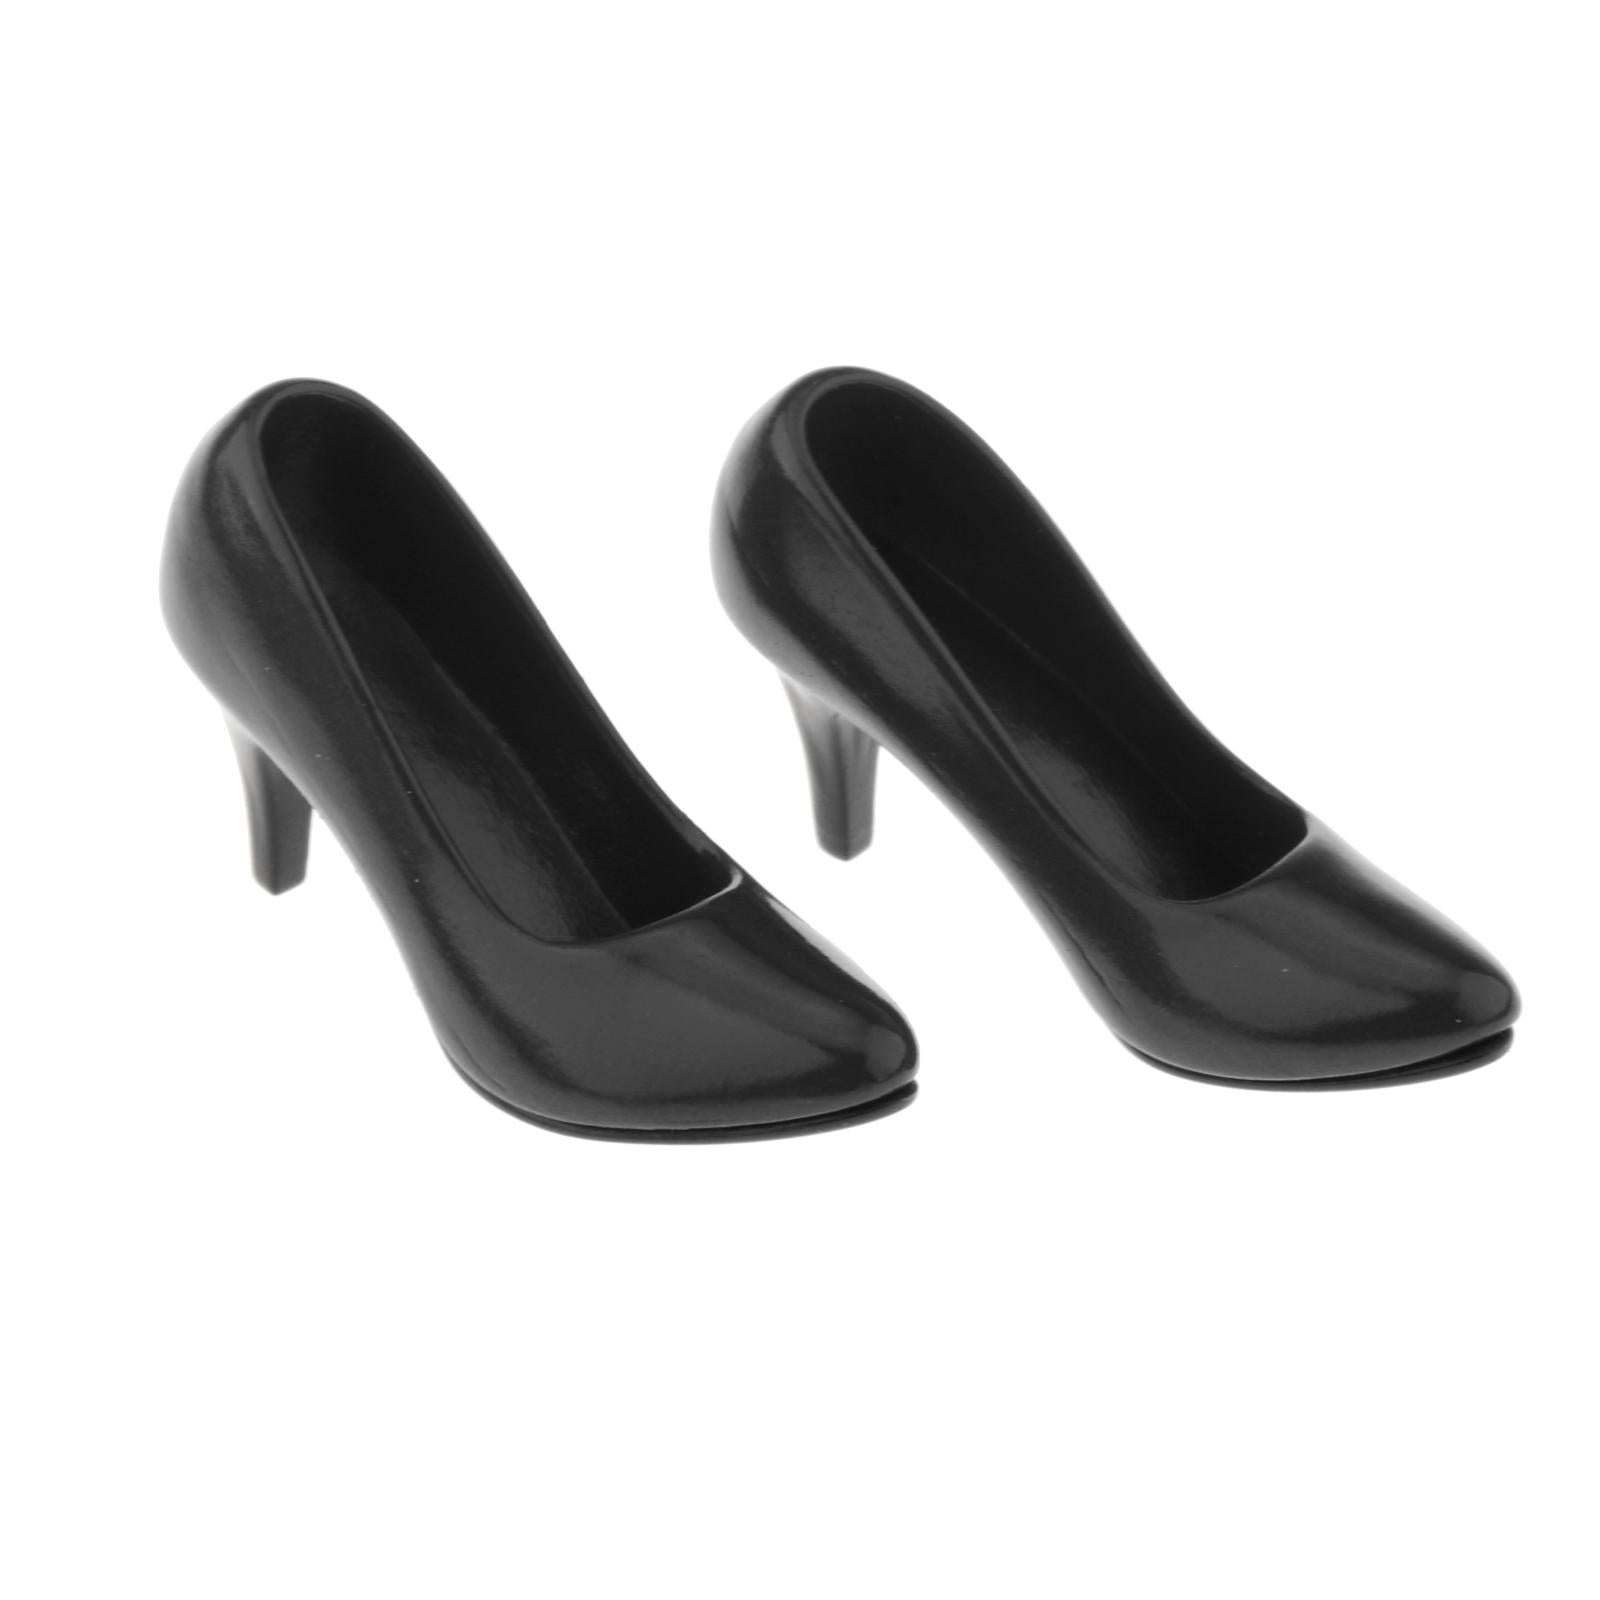 1/6 Womans Fashion High Heel Shoes Pump for 12inch OB OD Figures Black